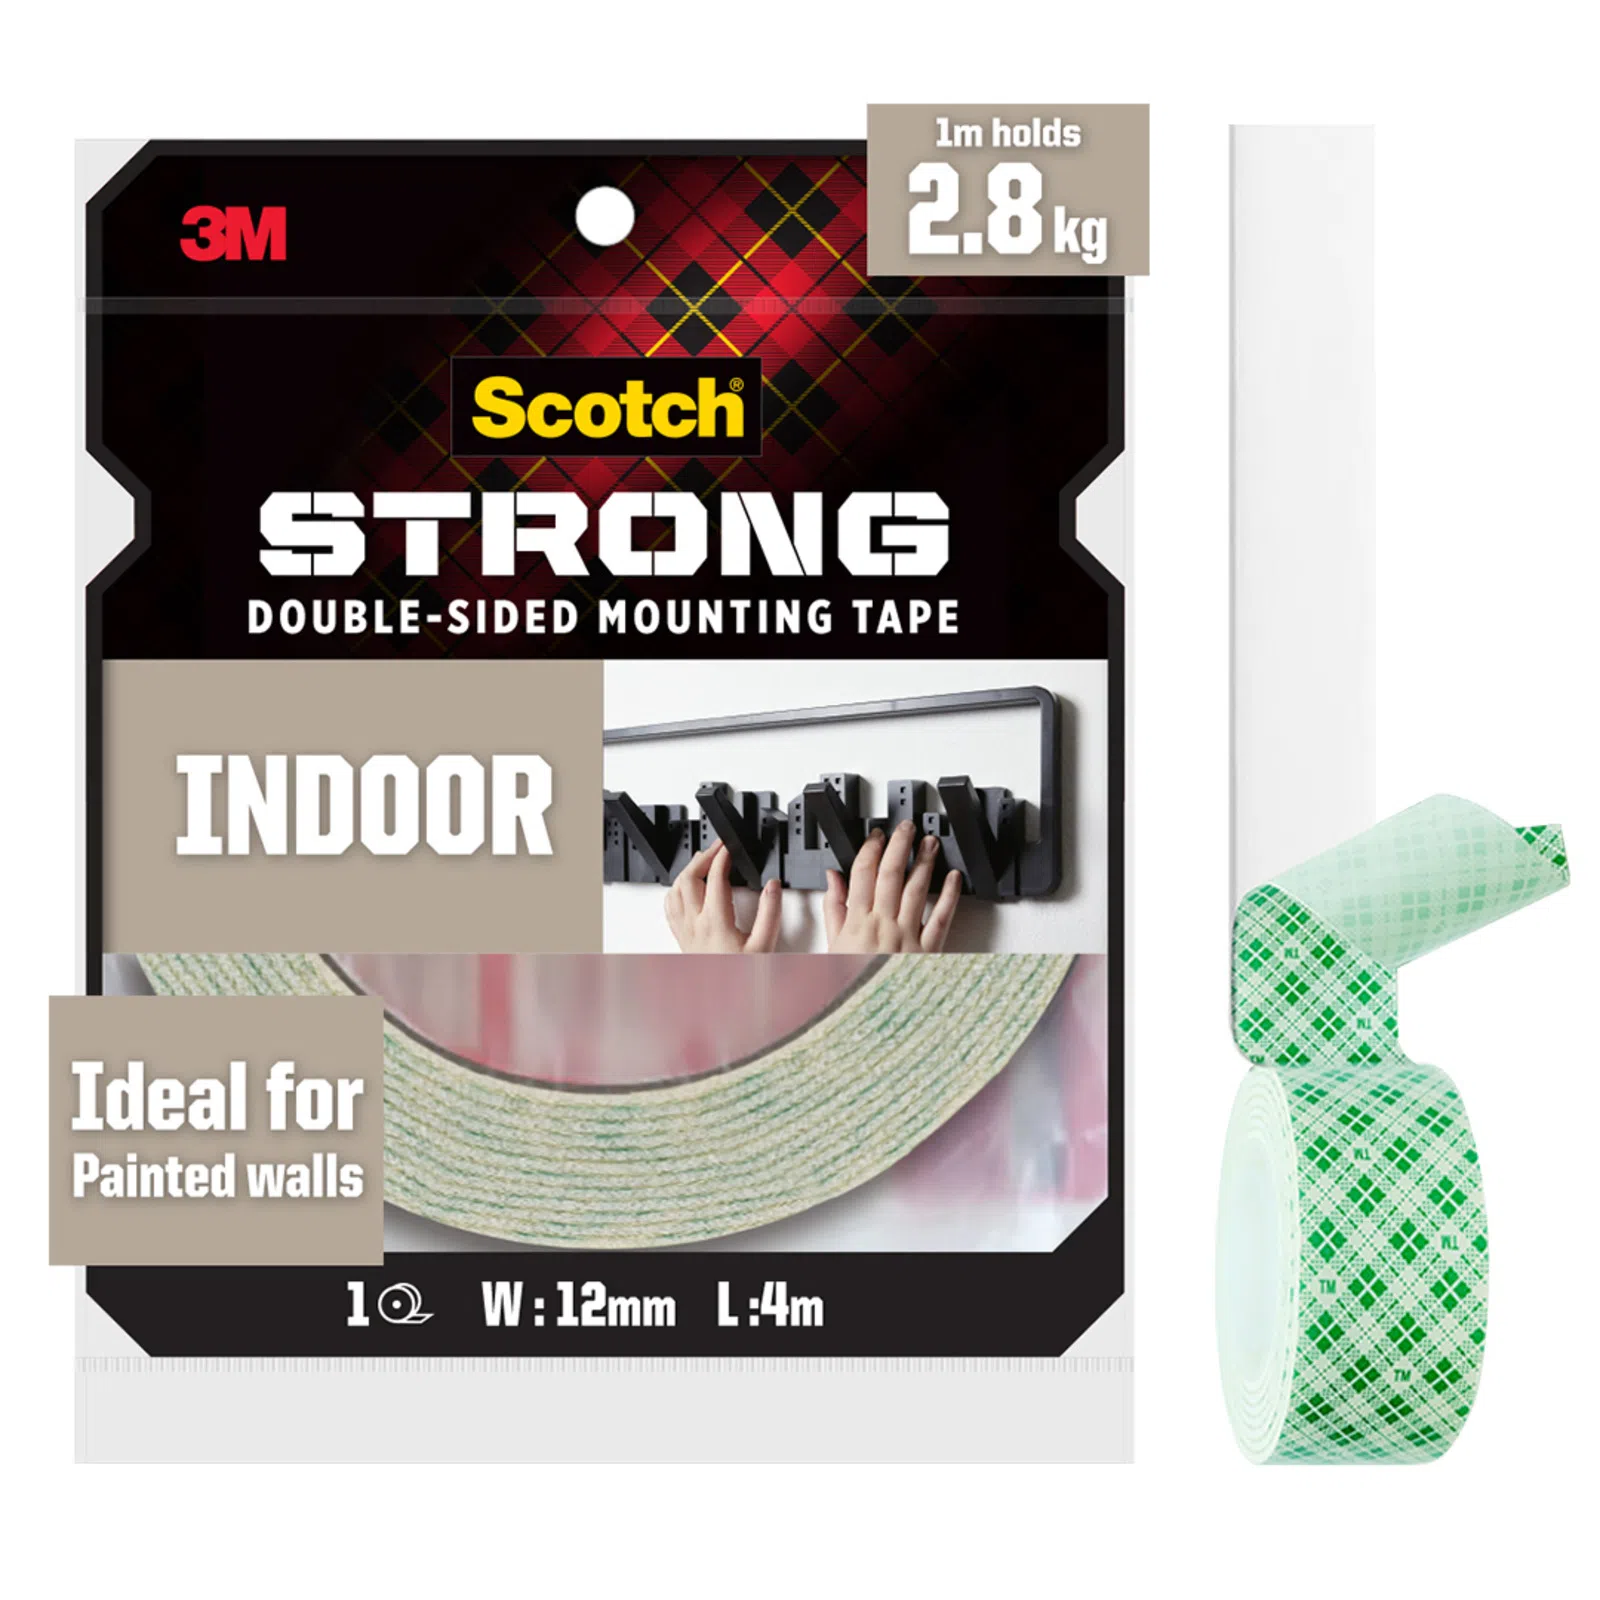 3M Scotch INDOOR Double Sided Mounting Tape 12MM X 4M